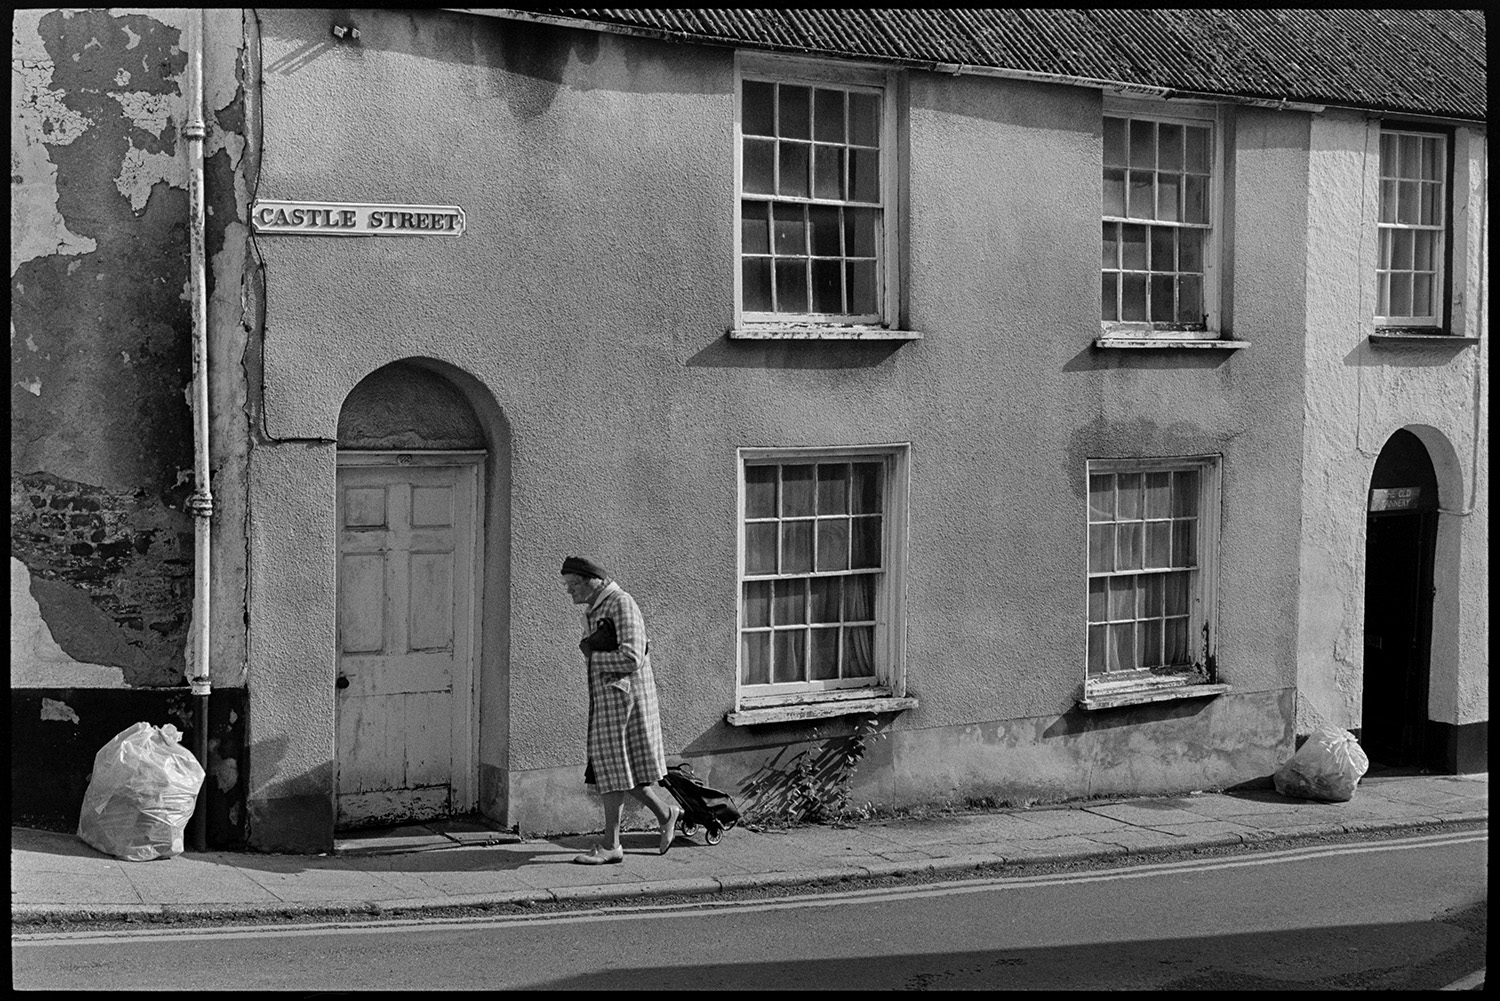 Town street with fine house front, passers by on pavement nice windows, round arched door.
[A woman, pulling a shopping trolley, walking past a house at Castle Street, Torrington. A bag of rubbish is on the pavement by a wall with crumbling plasterwork.]